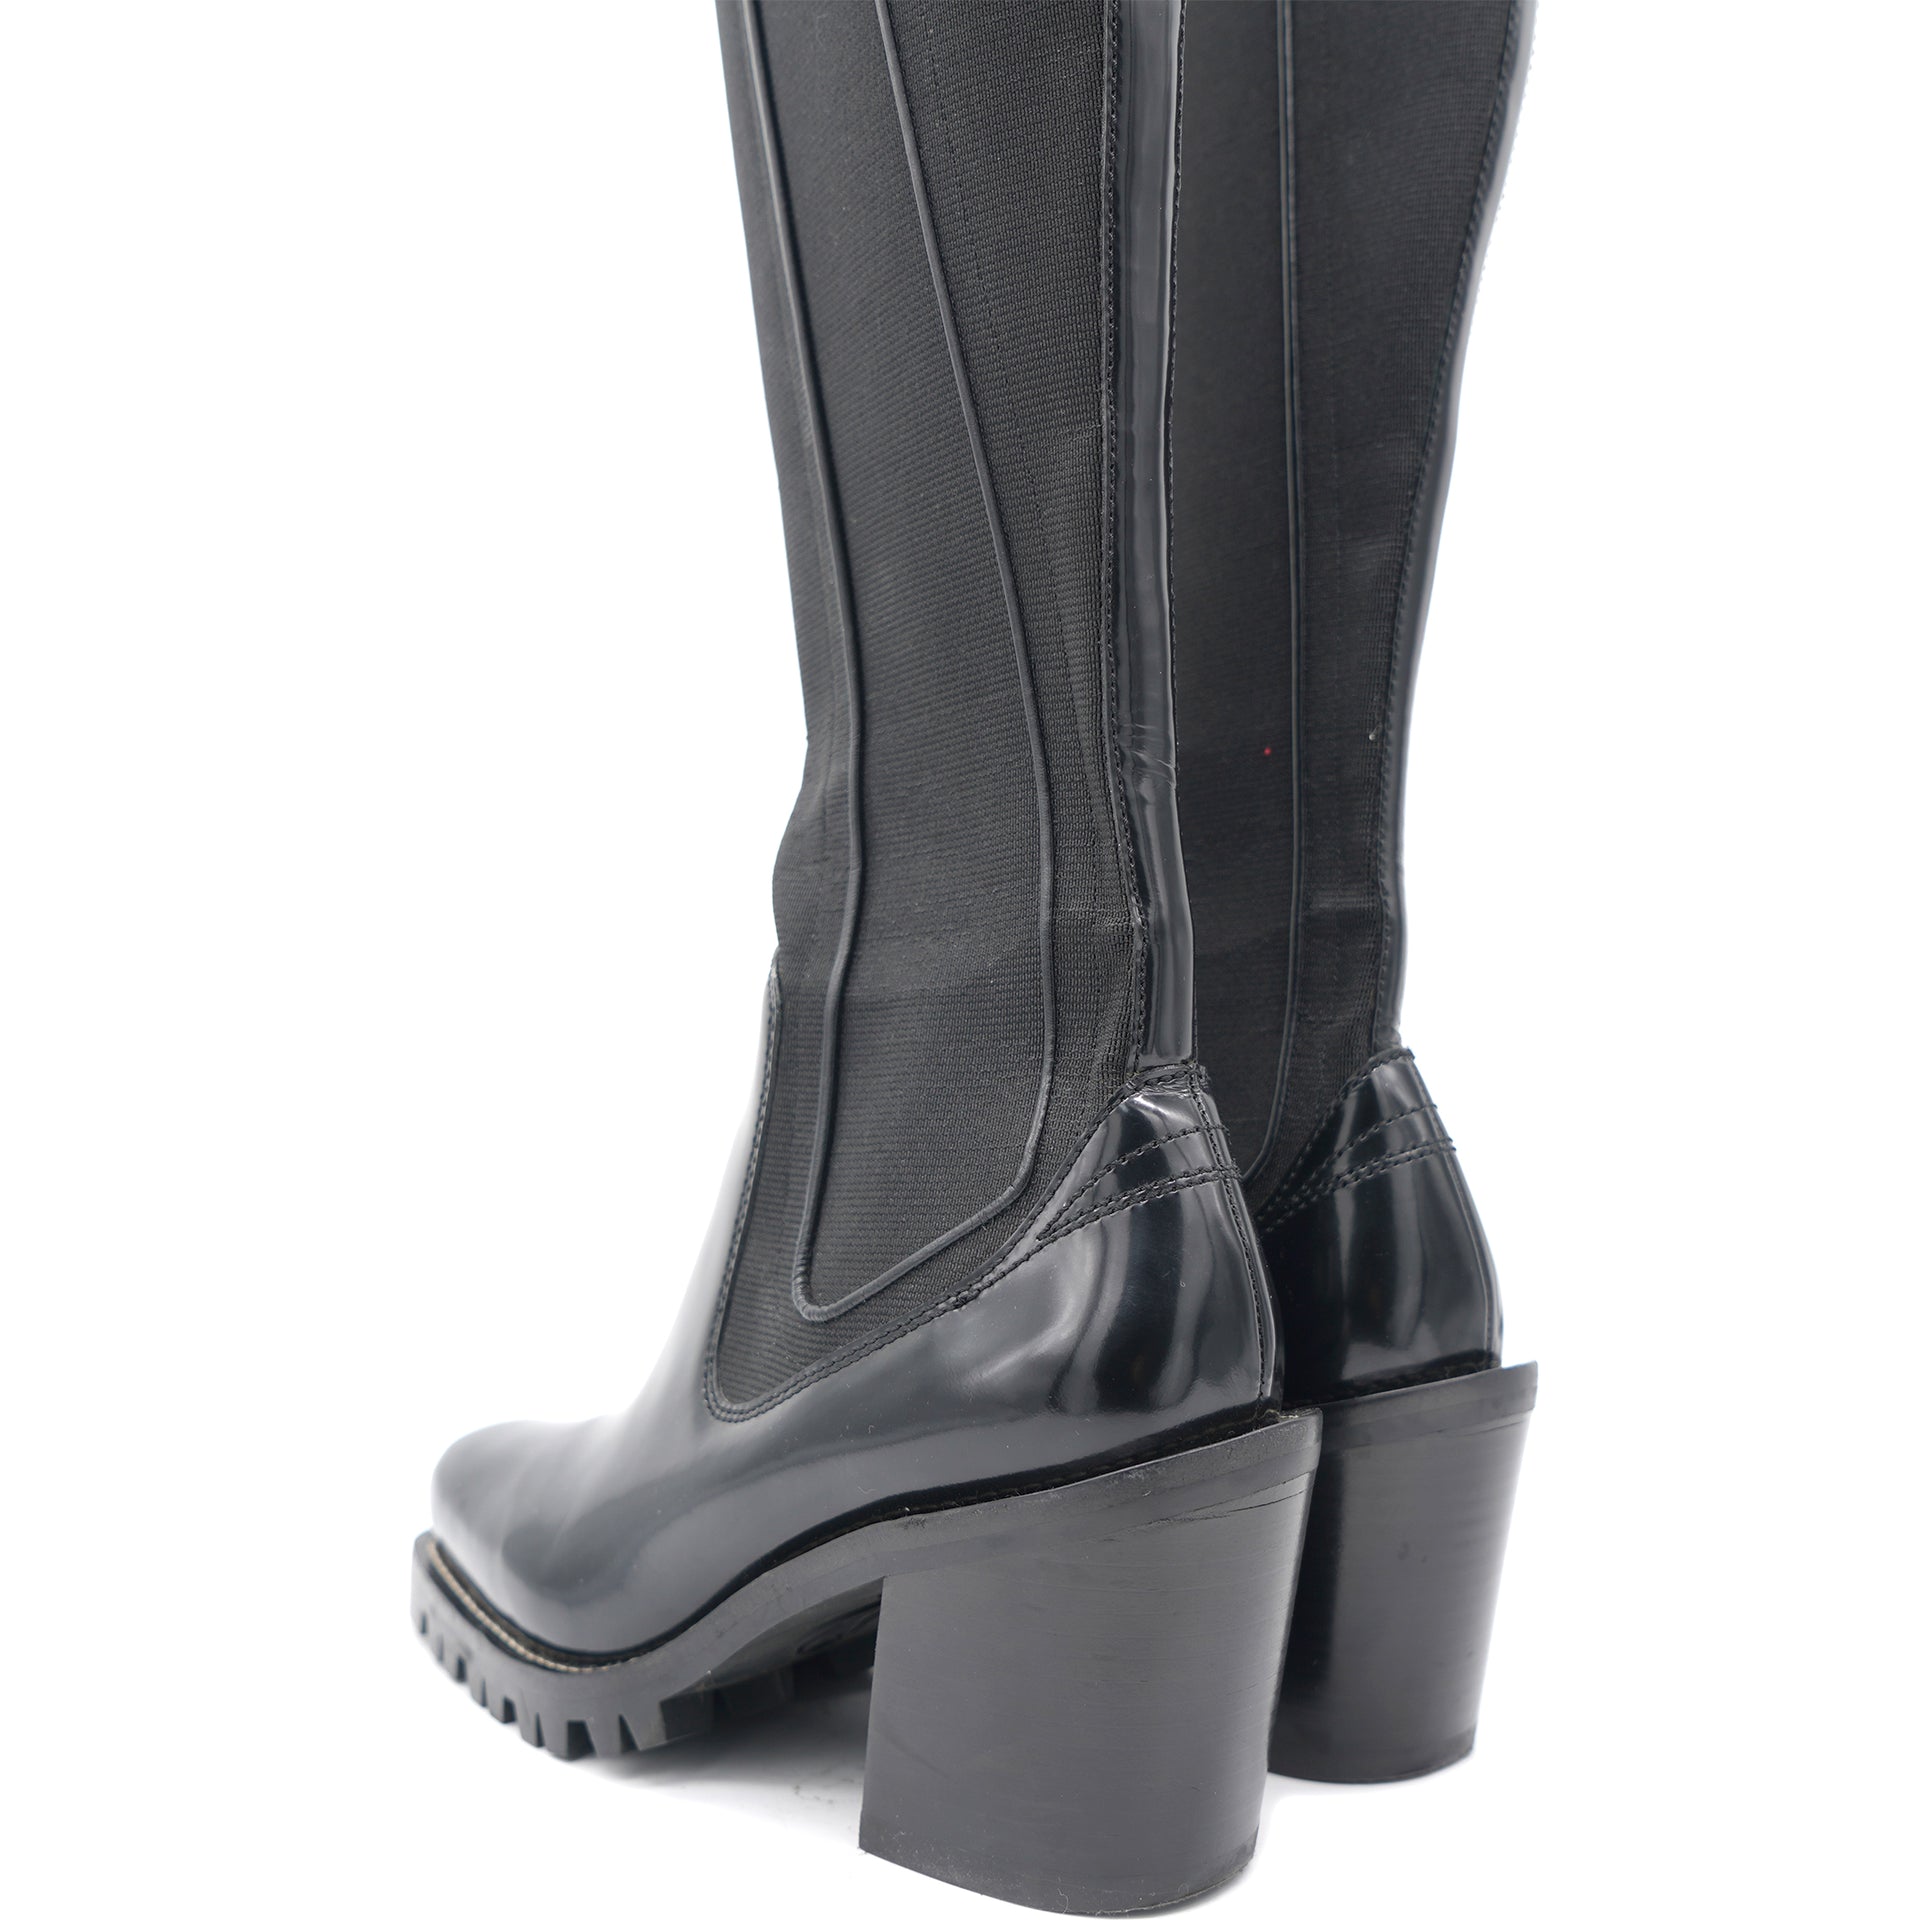 Black Fabric and Patent Leather Knee Length Boots Size 39